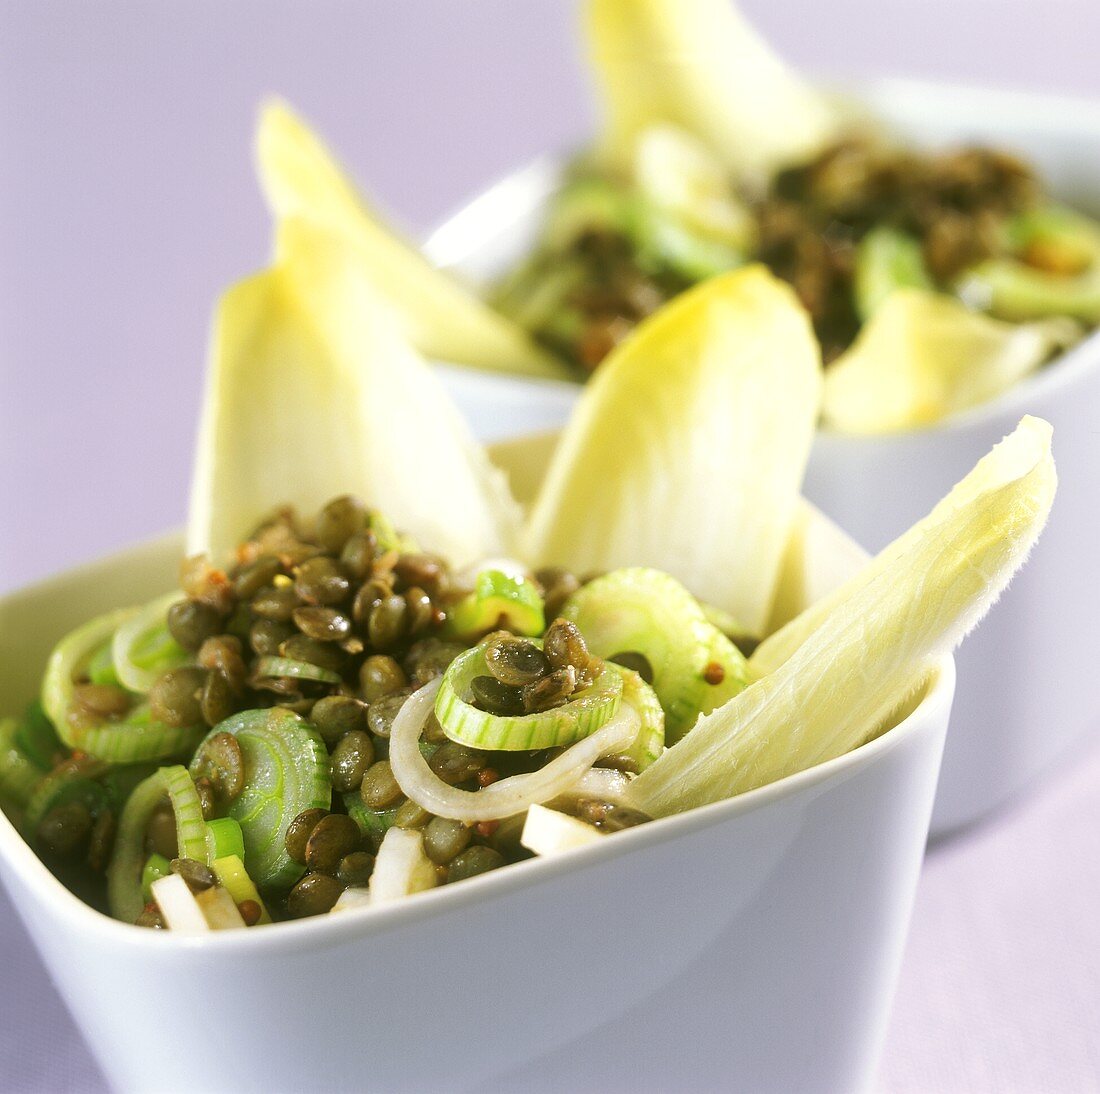 Lentil salad with chicory and spring onions